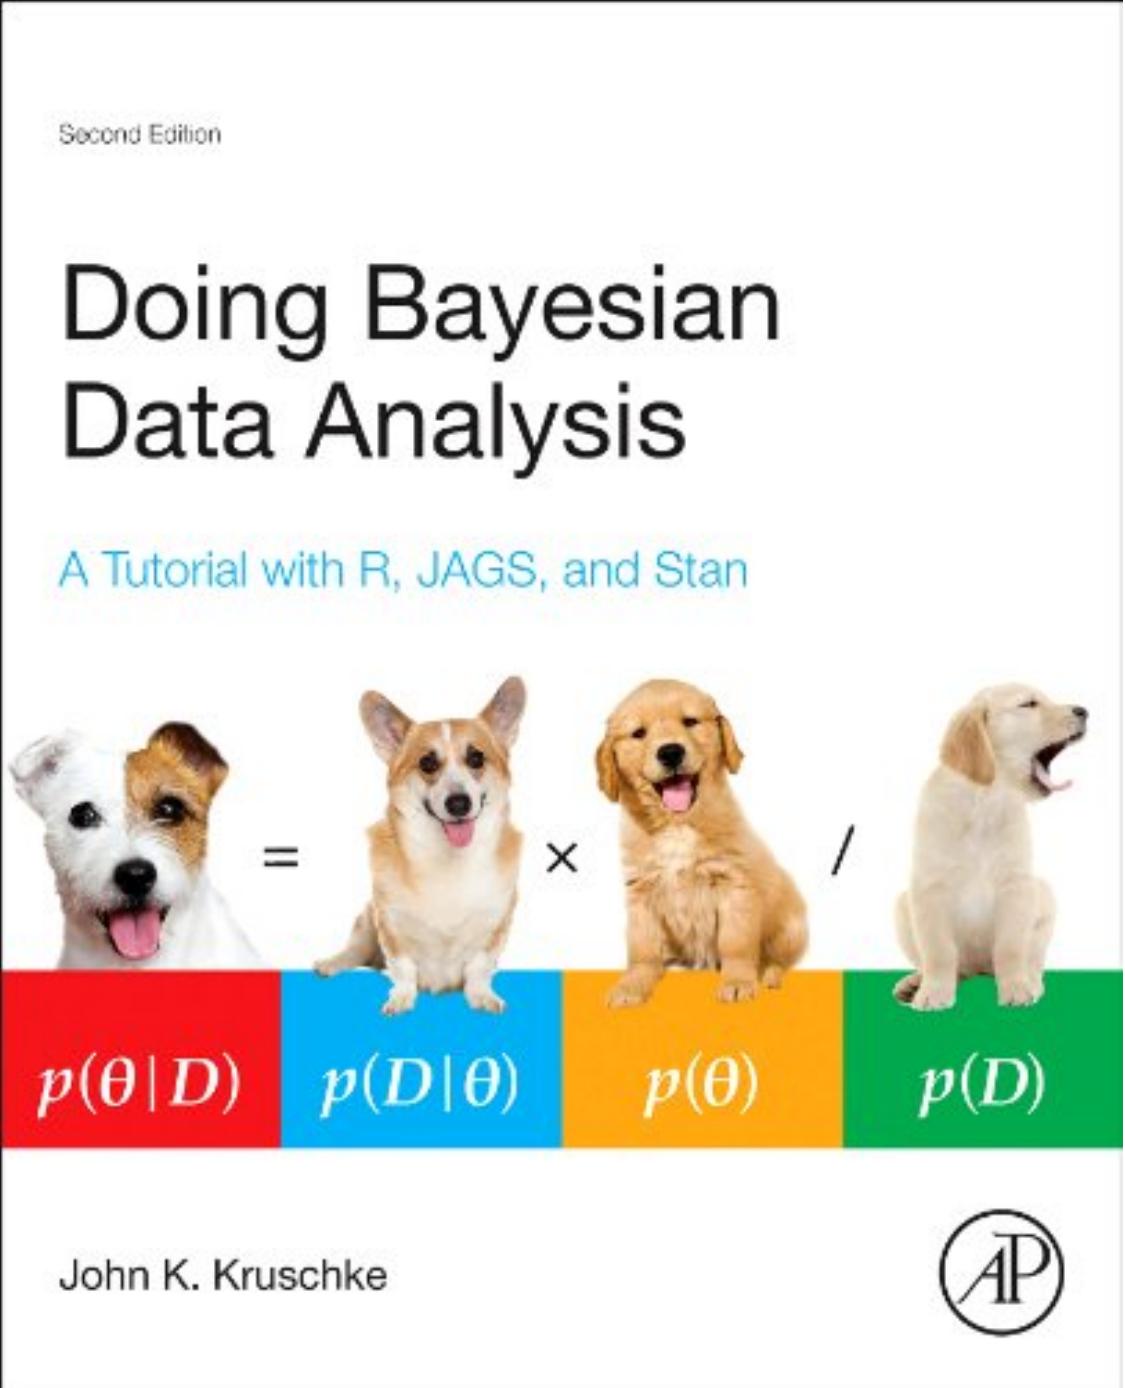 Doing Bayesian Data Analysis A Tutorial with R, JAGS, and Stan 2nd Edition.jpg